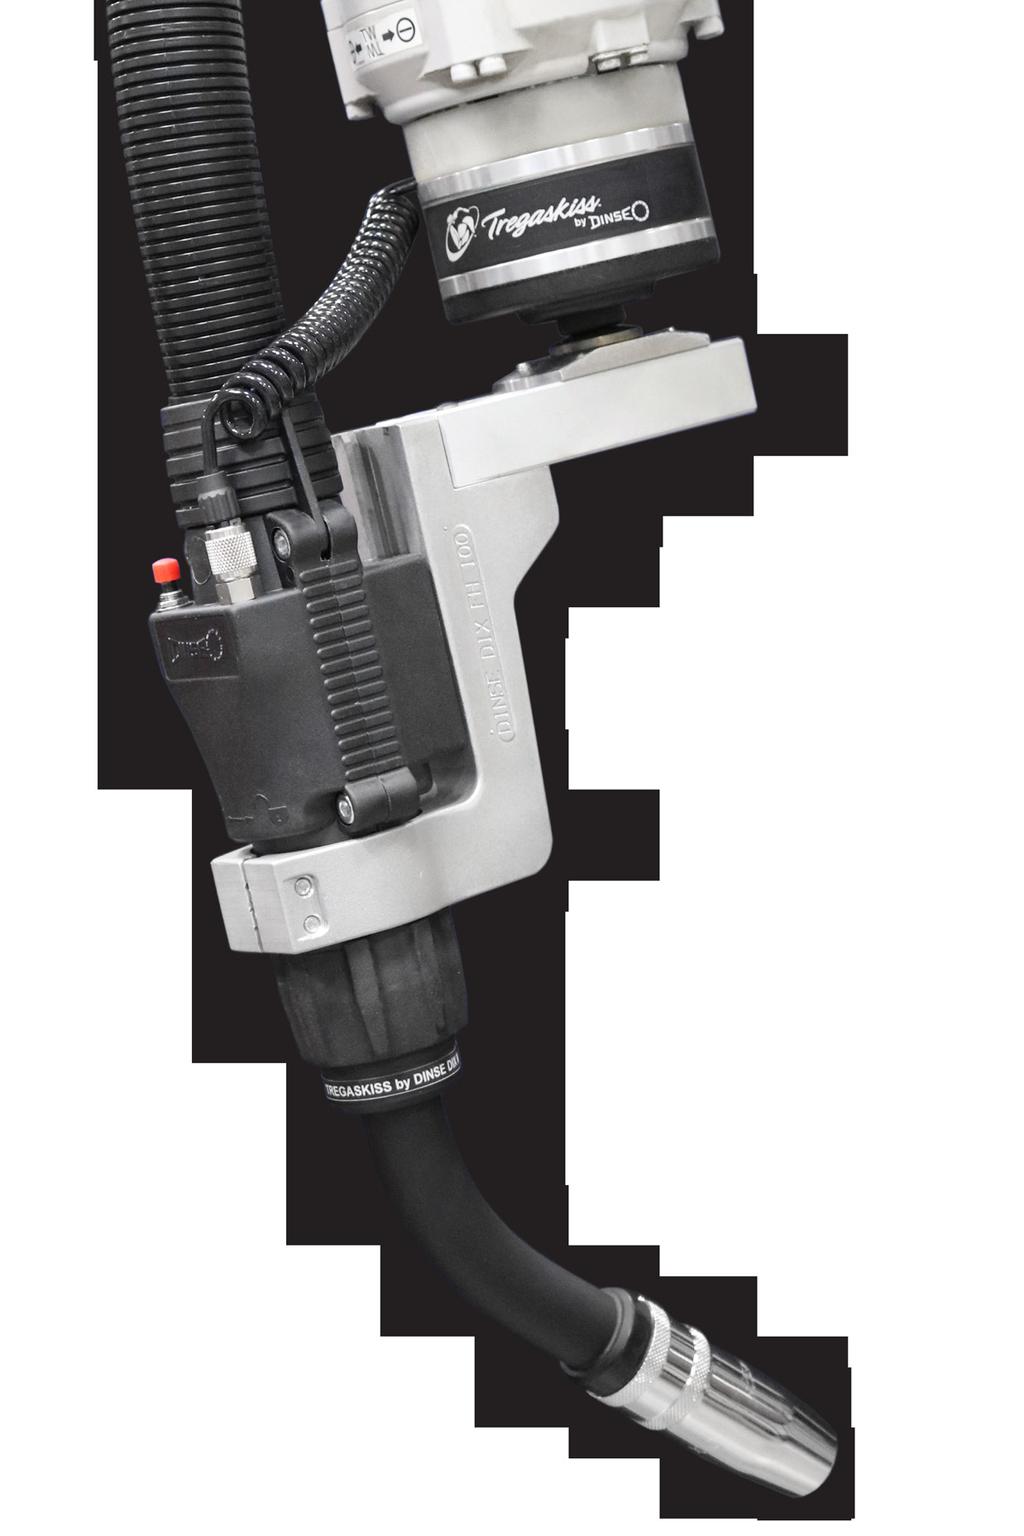 Tregaskiss by DINSE CWD Robotic Water-Cooled MIG Gun Quick Specs Duty Cycle Rating 100%with Mixed Gases 350 amp, 400 amp 500 amp, 600 amp Processes MIG (GMAW) Welding Issued August 2017 Index No.